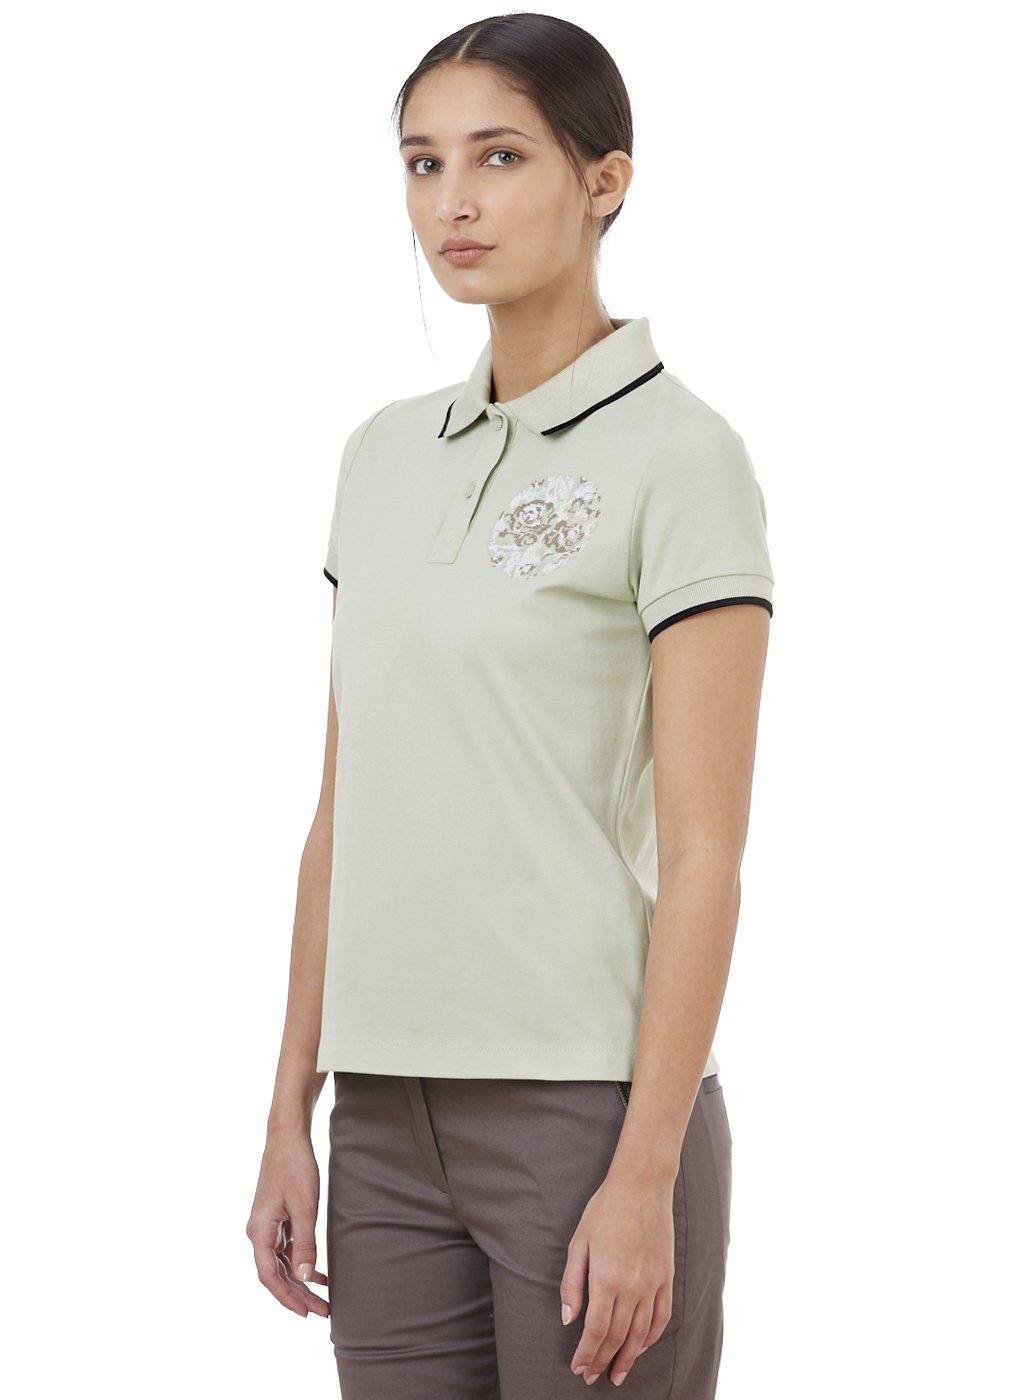 TESSA FLORAL EMBROIDERED POLO SHIRT - Genes online store 2020